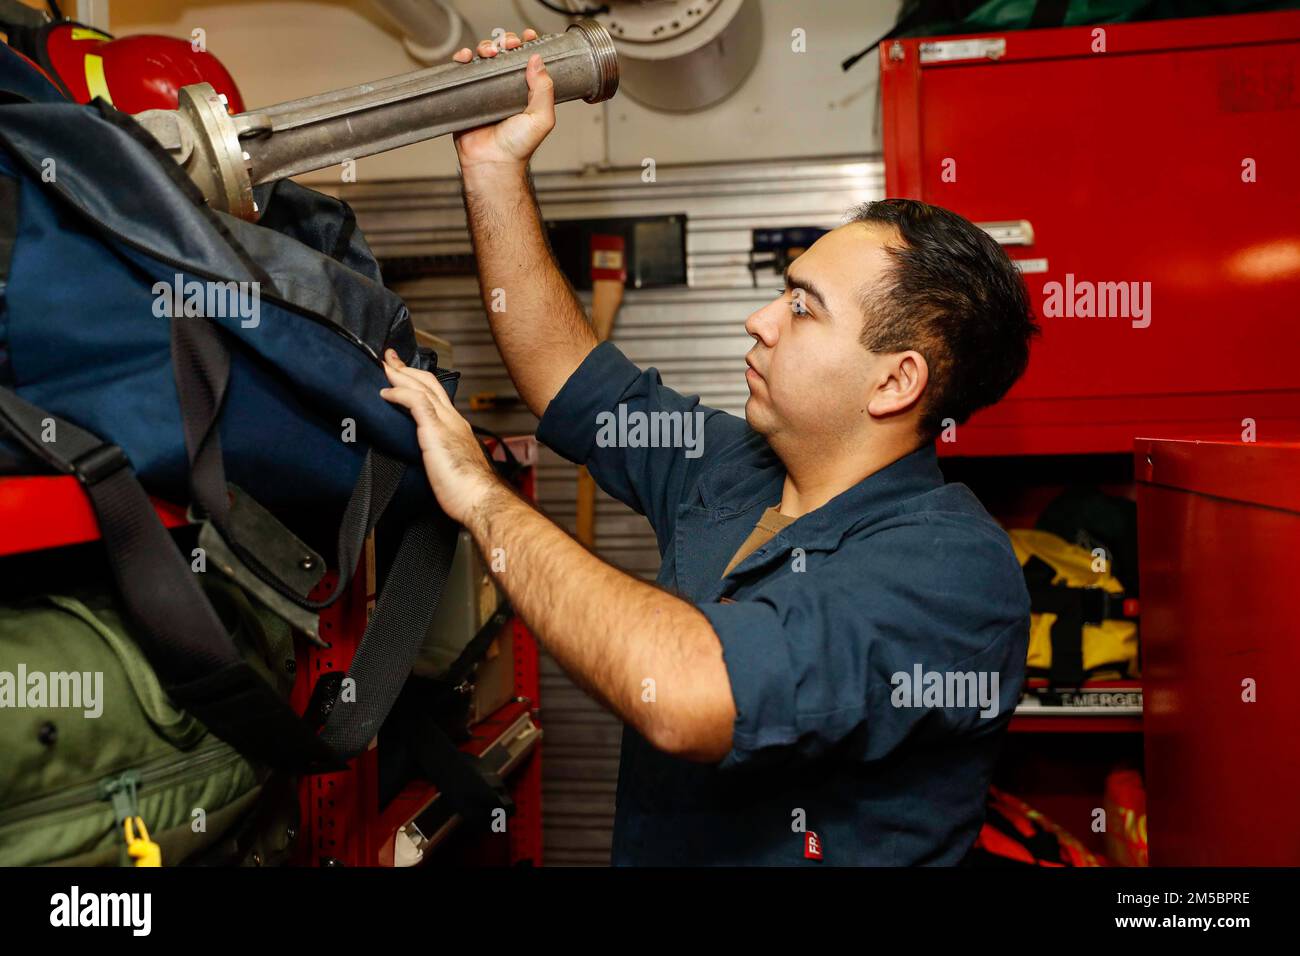 PHILIPPINE SEA (Feb. 24, 2022) Damage Controlman Fireman John Mancia, from Dallas, takes inventory of dewatering equipment in a repair locker aboard the Nimitz-class aircraft carrier USS Abraham Lincoln (CVN 72). Abraham Lincoln Strike Group is on a scheduled deployment in the U.S. 7th Fleet area of operations to enhance interoperability through alliances and partnerships while serving as a ready-response force in support of a free and open Indo-Pacific region. Stock Photo